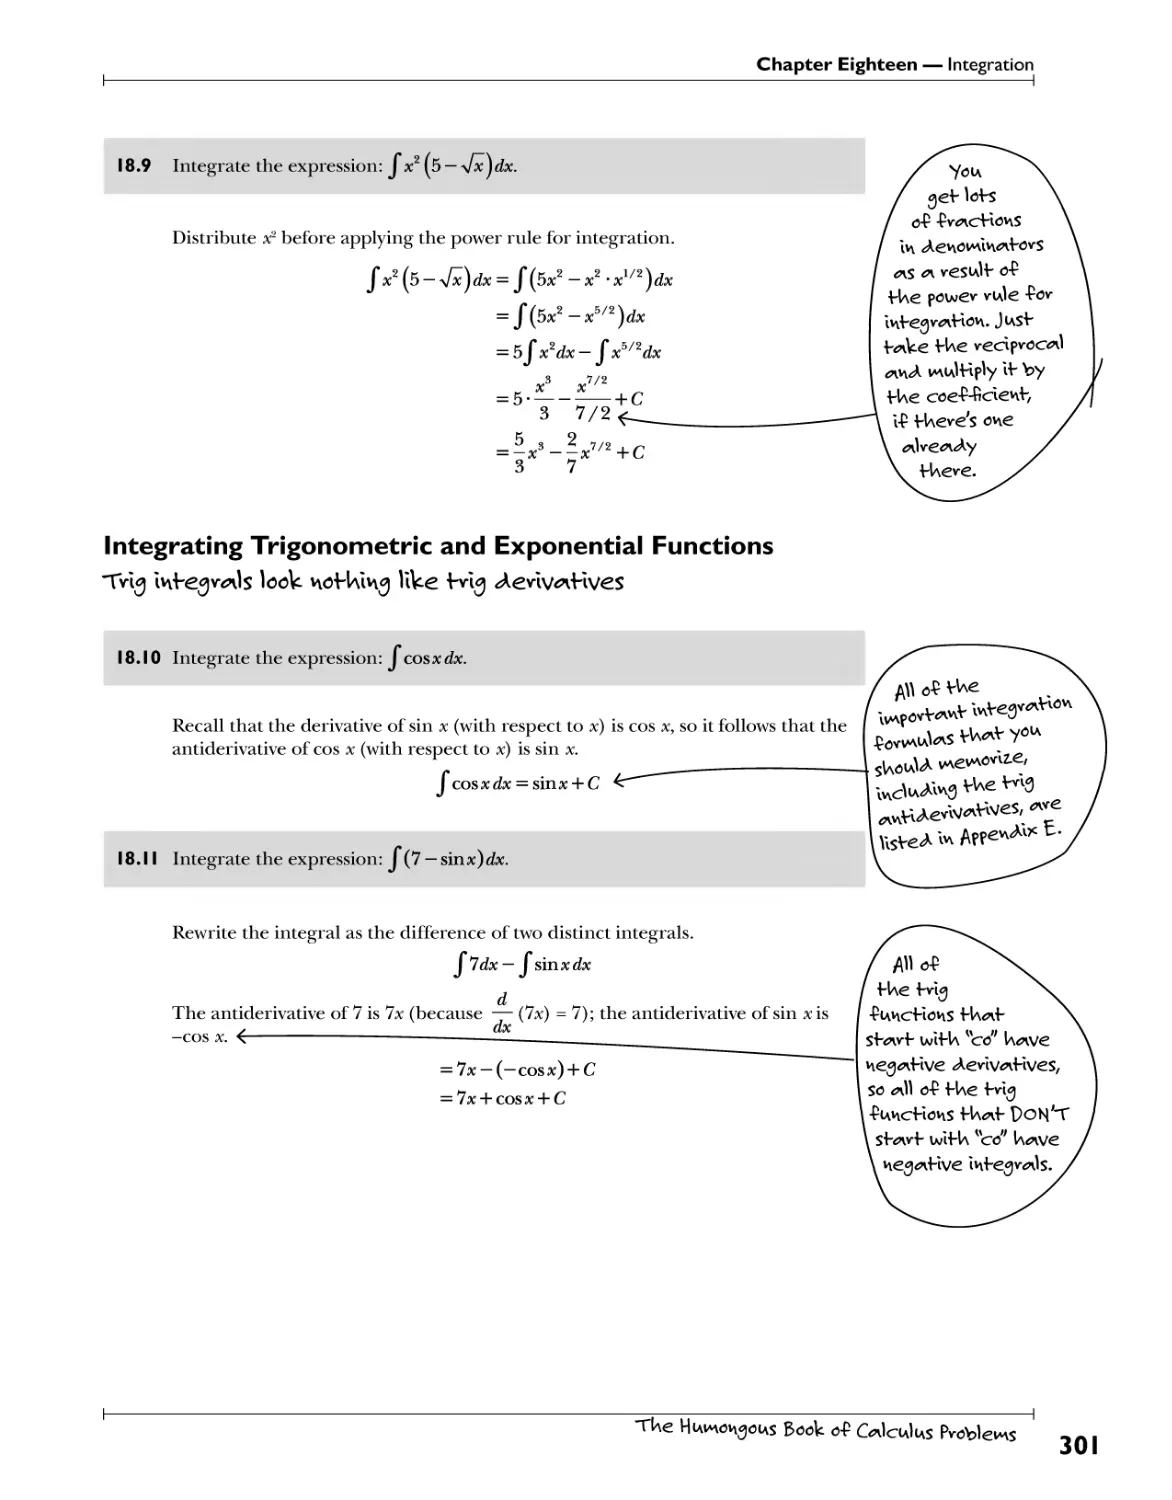 Integrating Trigonometric and Exponential Functions 301